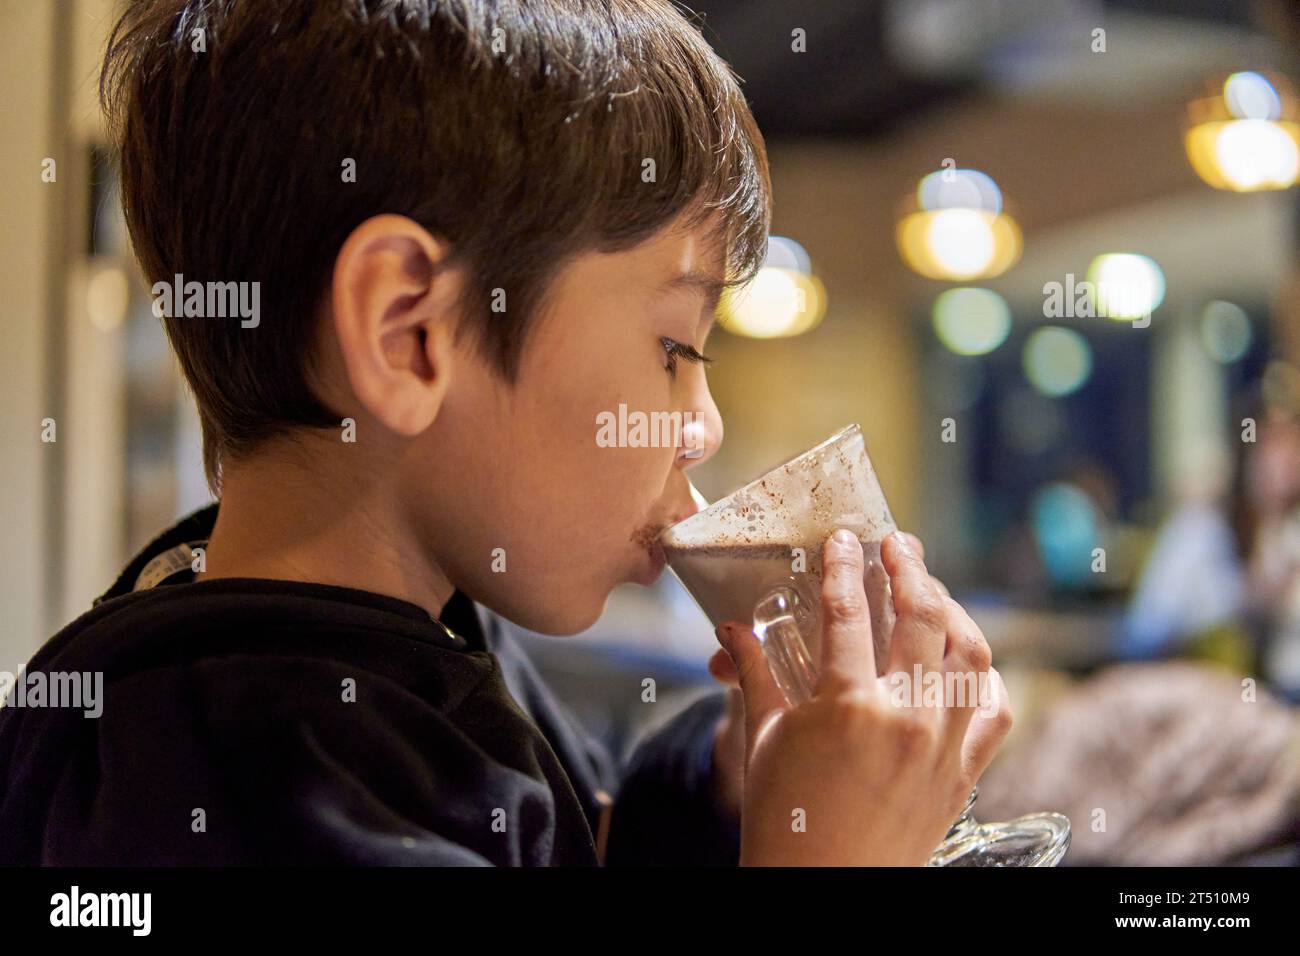 close-up portrait of latino little boy in profile in a bar drinking hot chocolate milk. Out of focus background and lighting Stock Photo